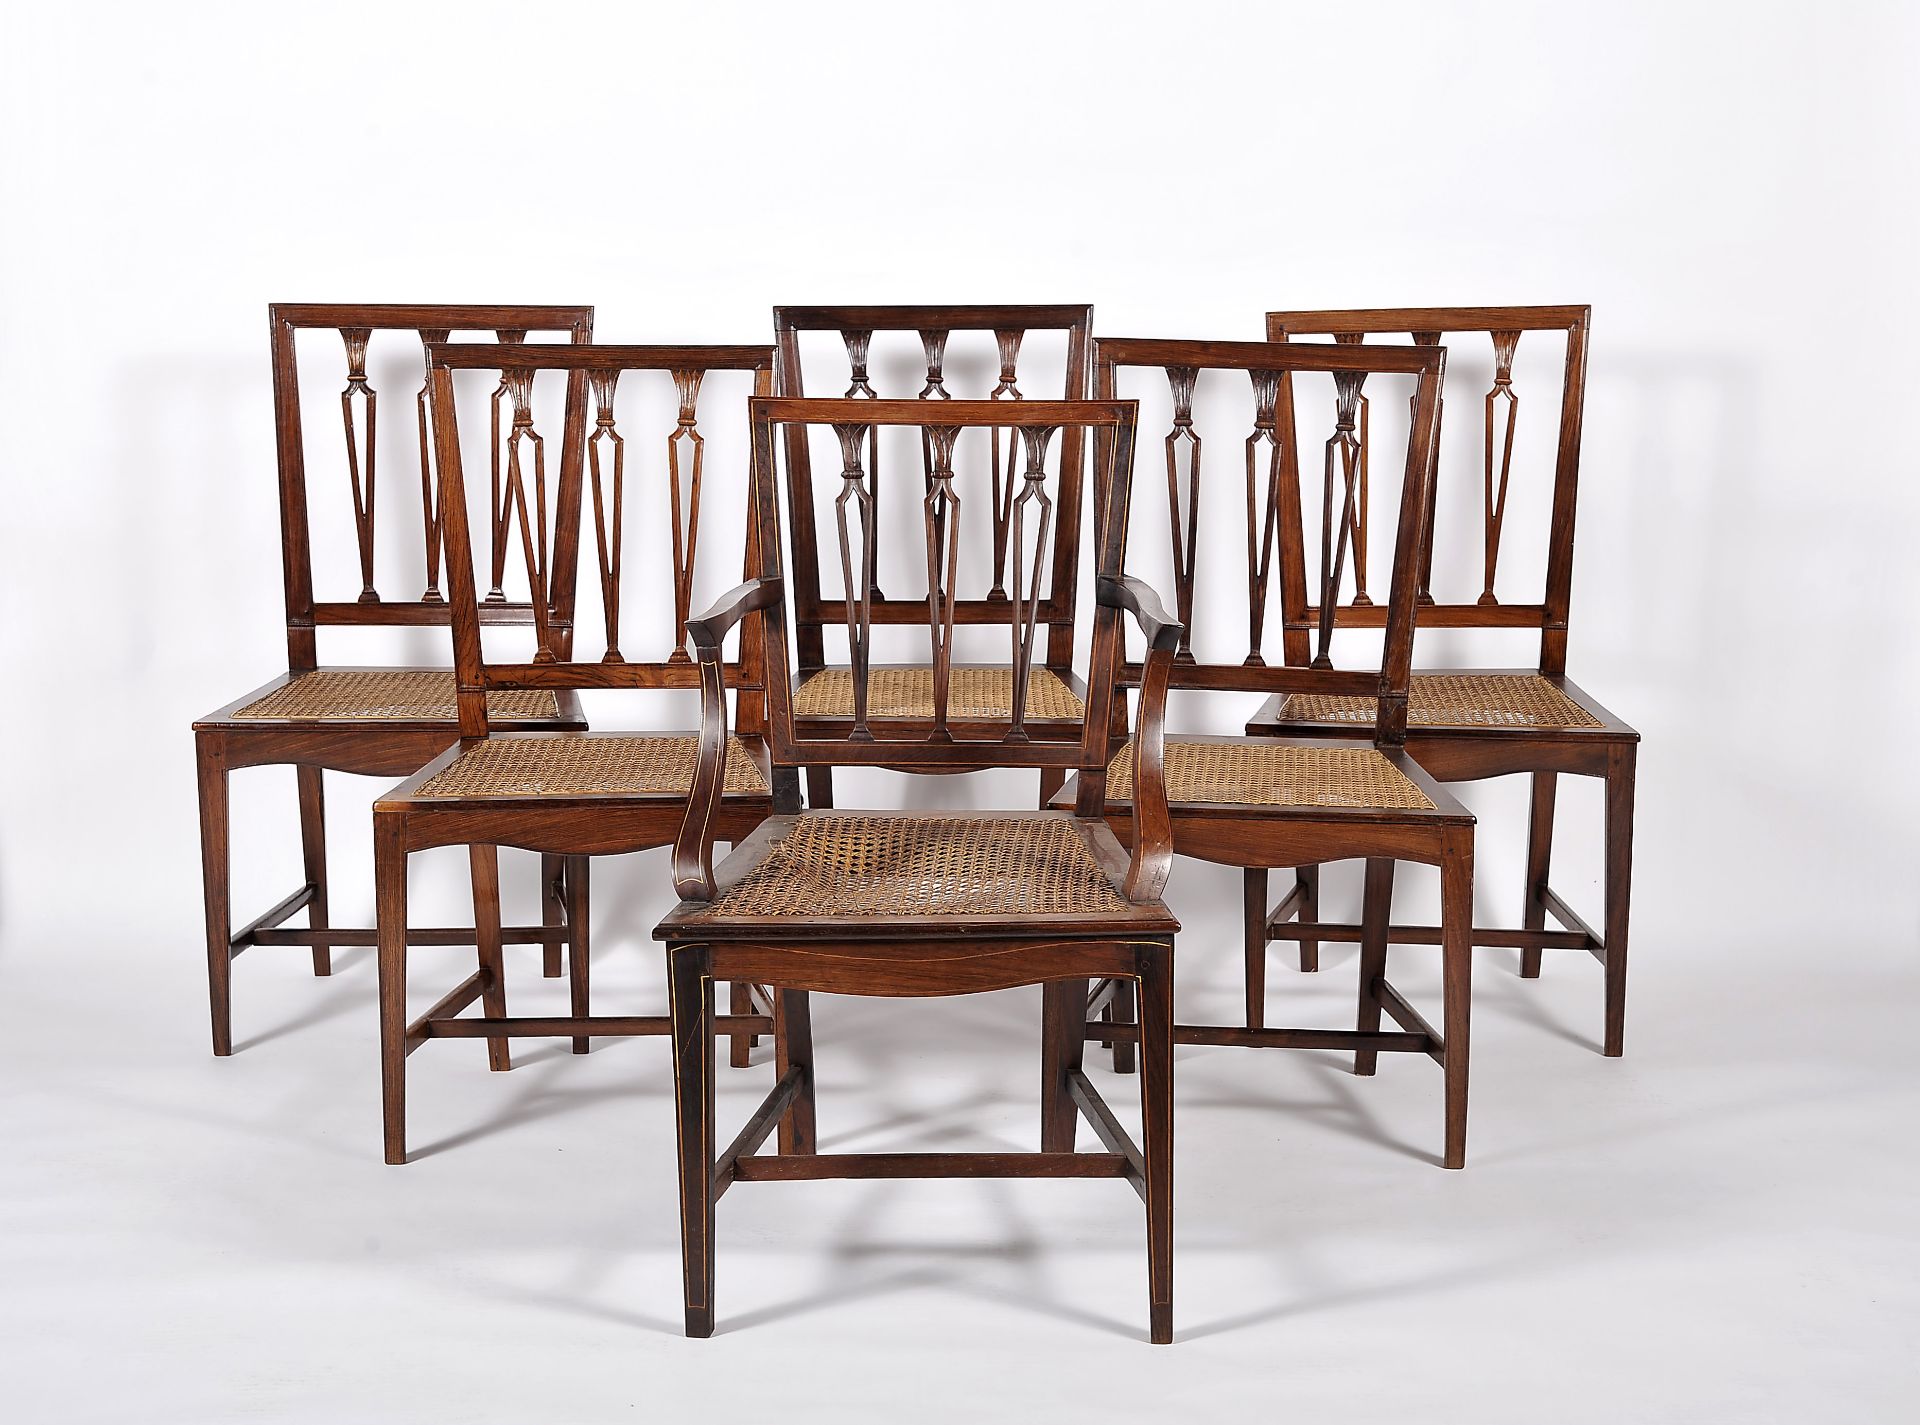 A set of twelve chairs including two armchairs